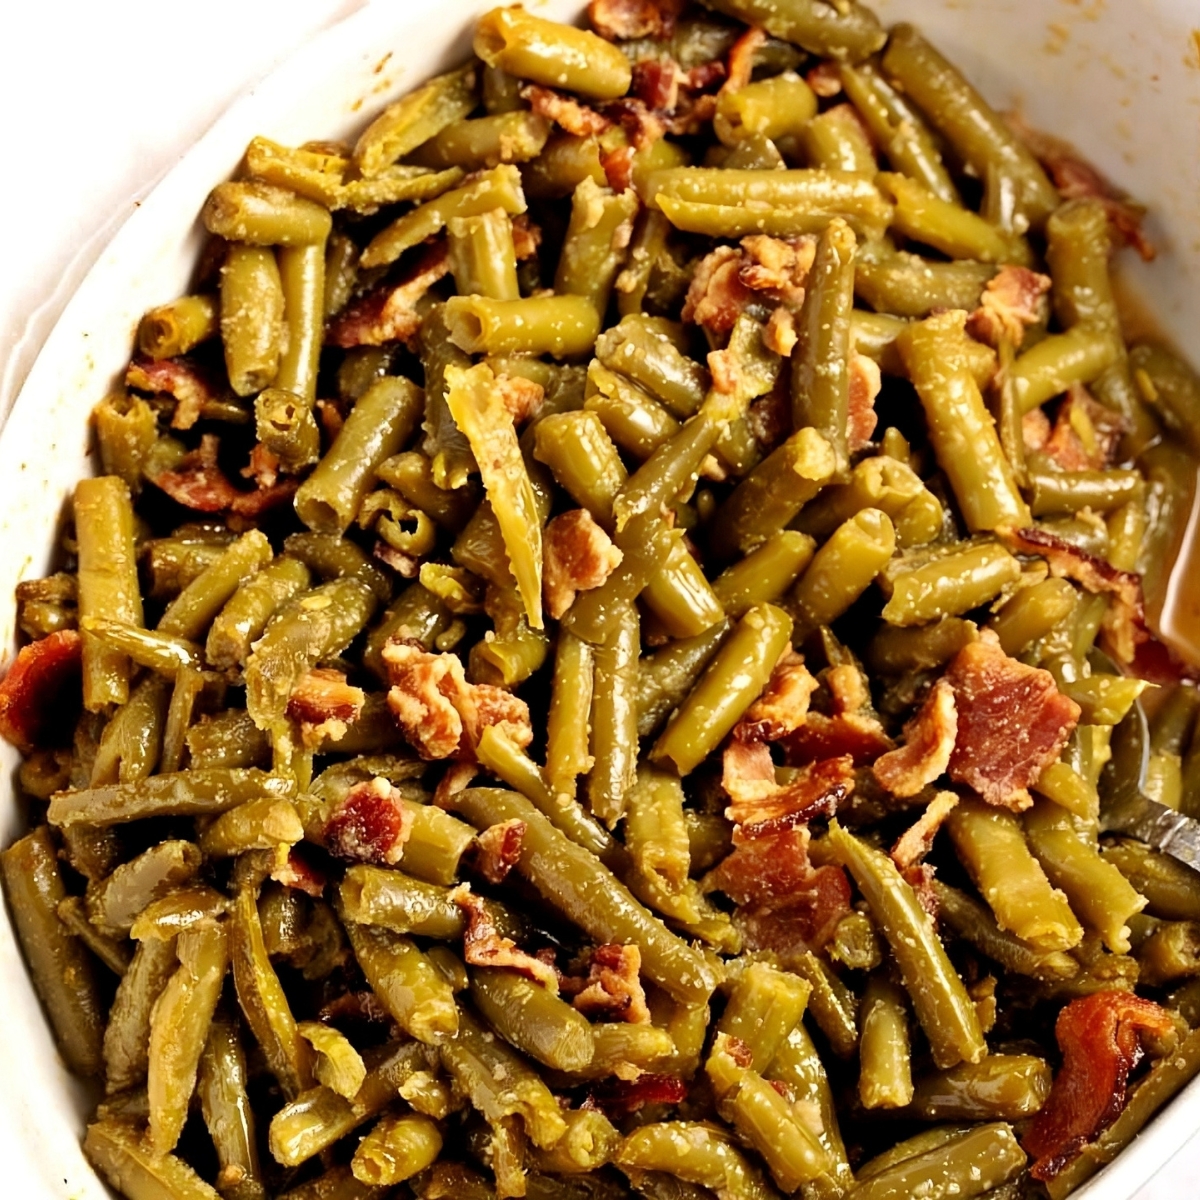 Closeup of Homemade Crack Green Beans with Bacon in a Baking Dish